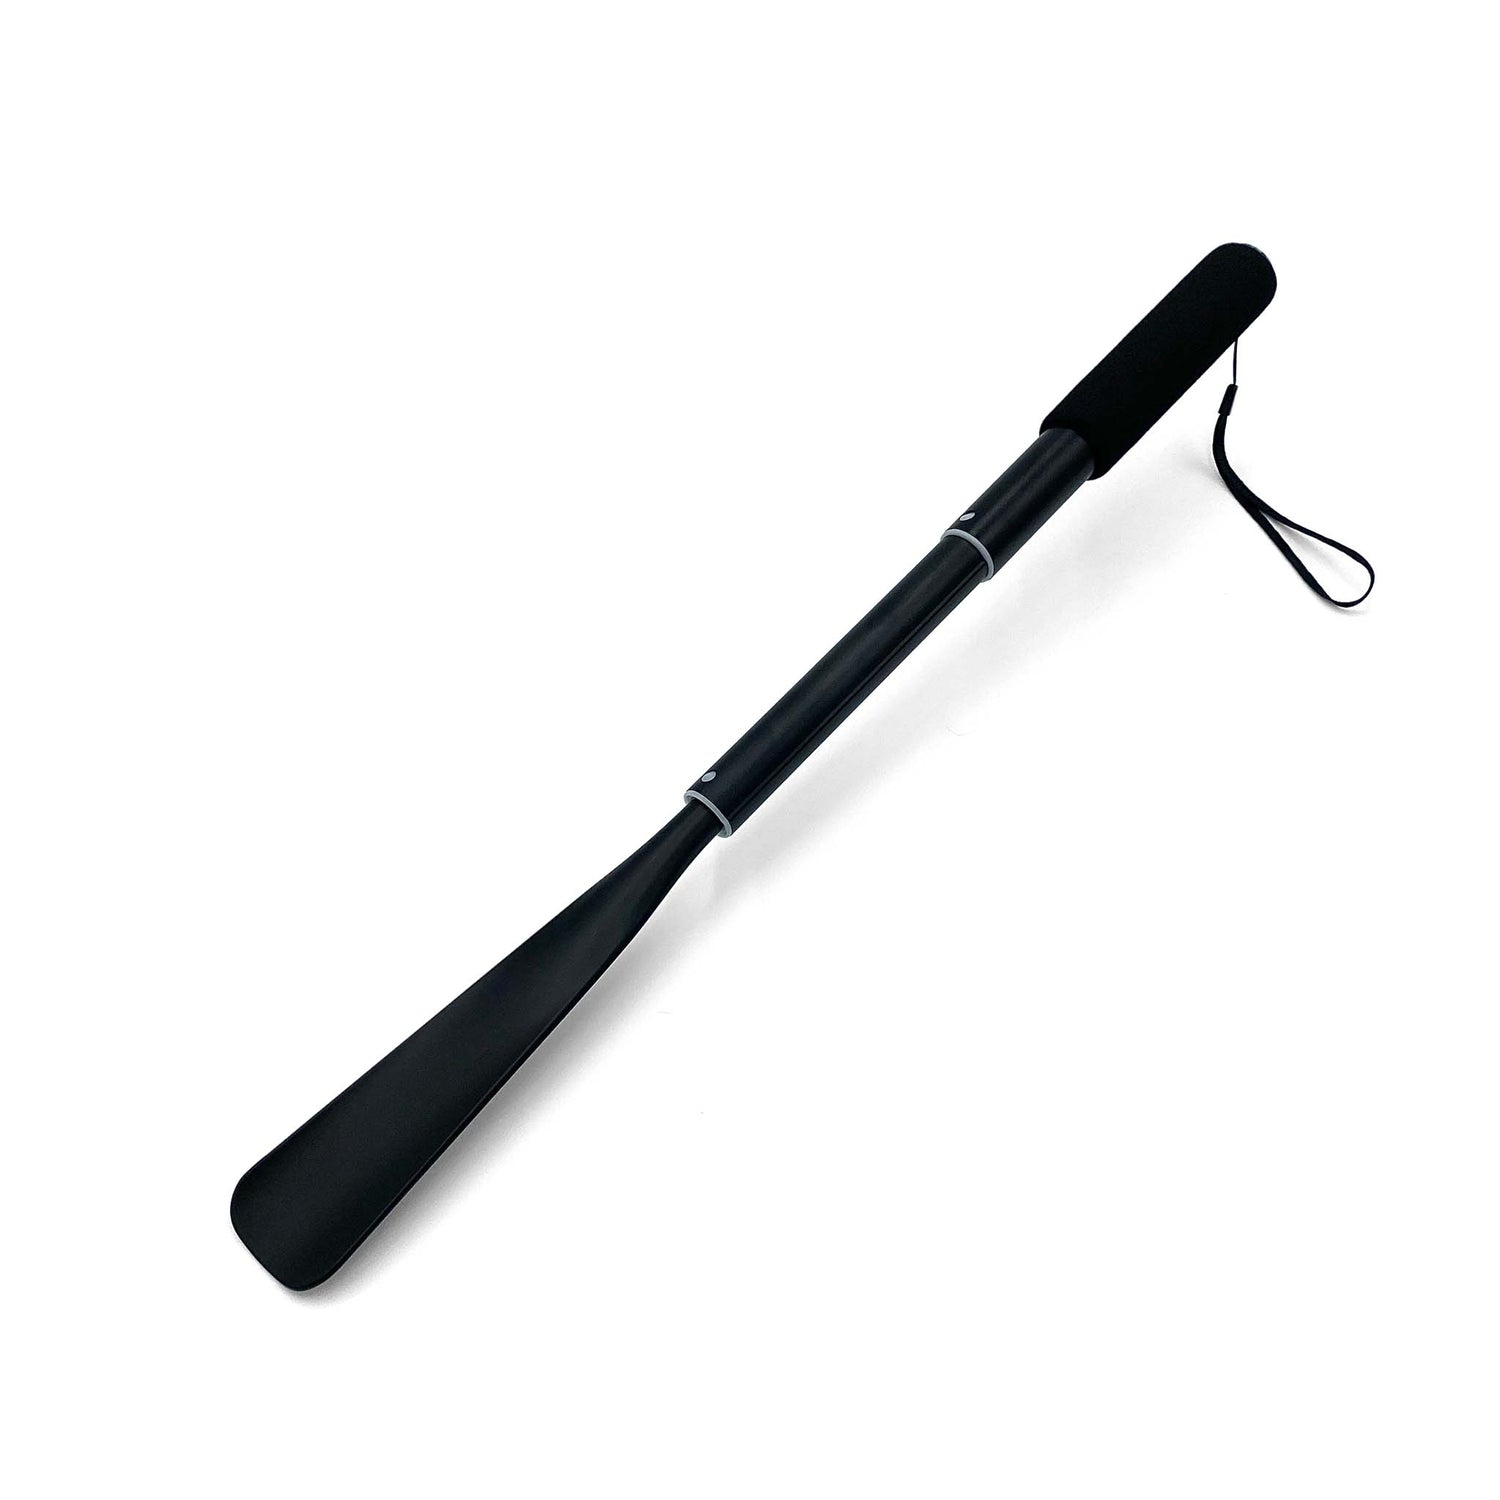 telescopic extendable extra long shoe horn partially collapsed